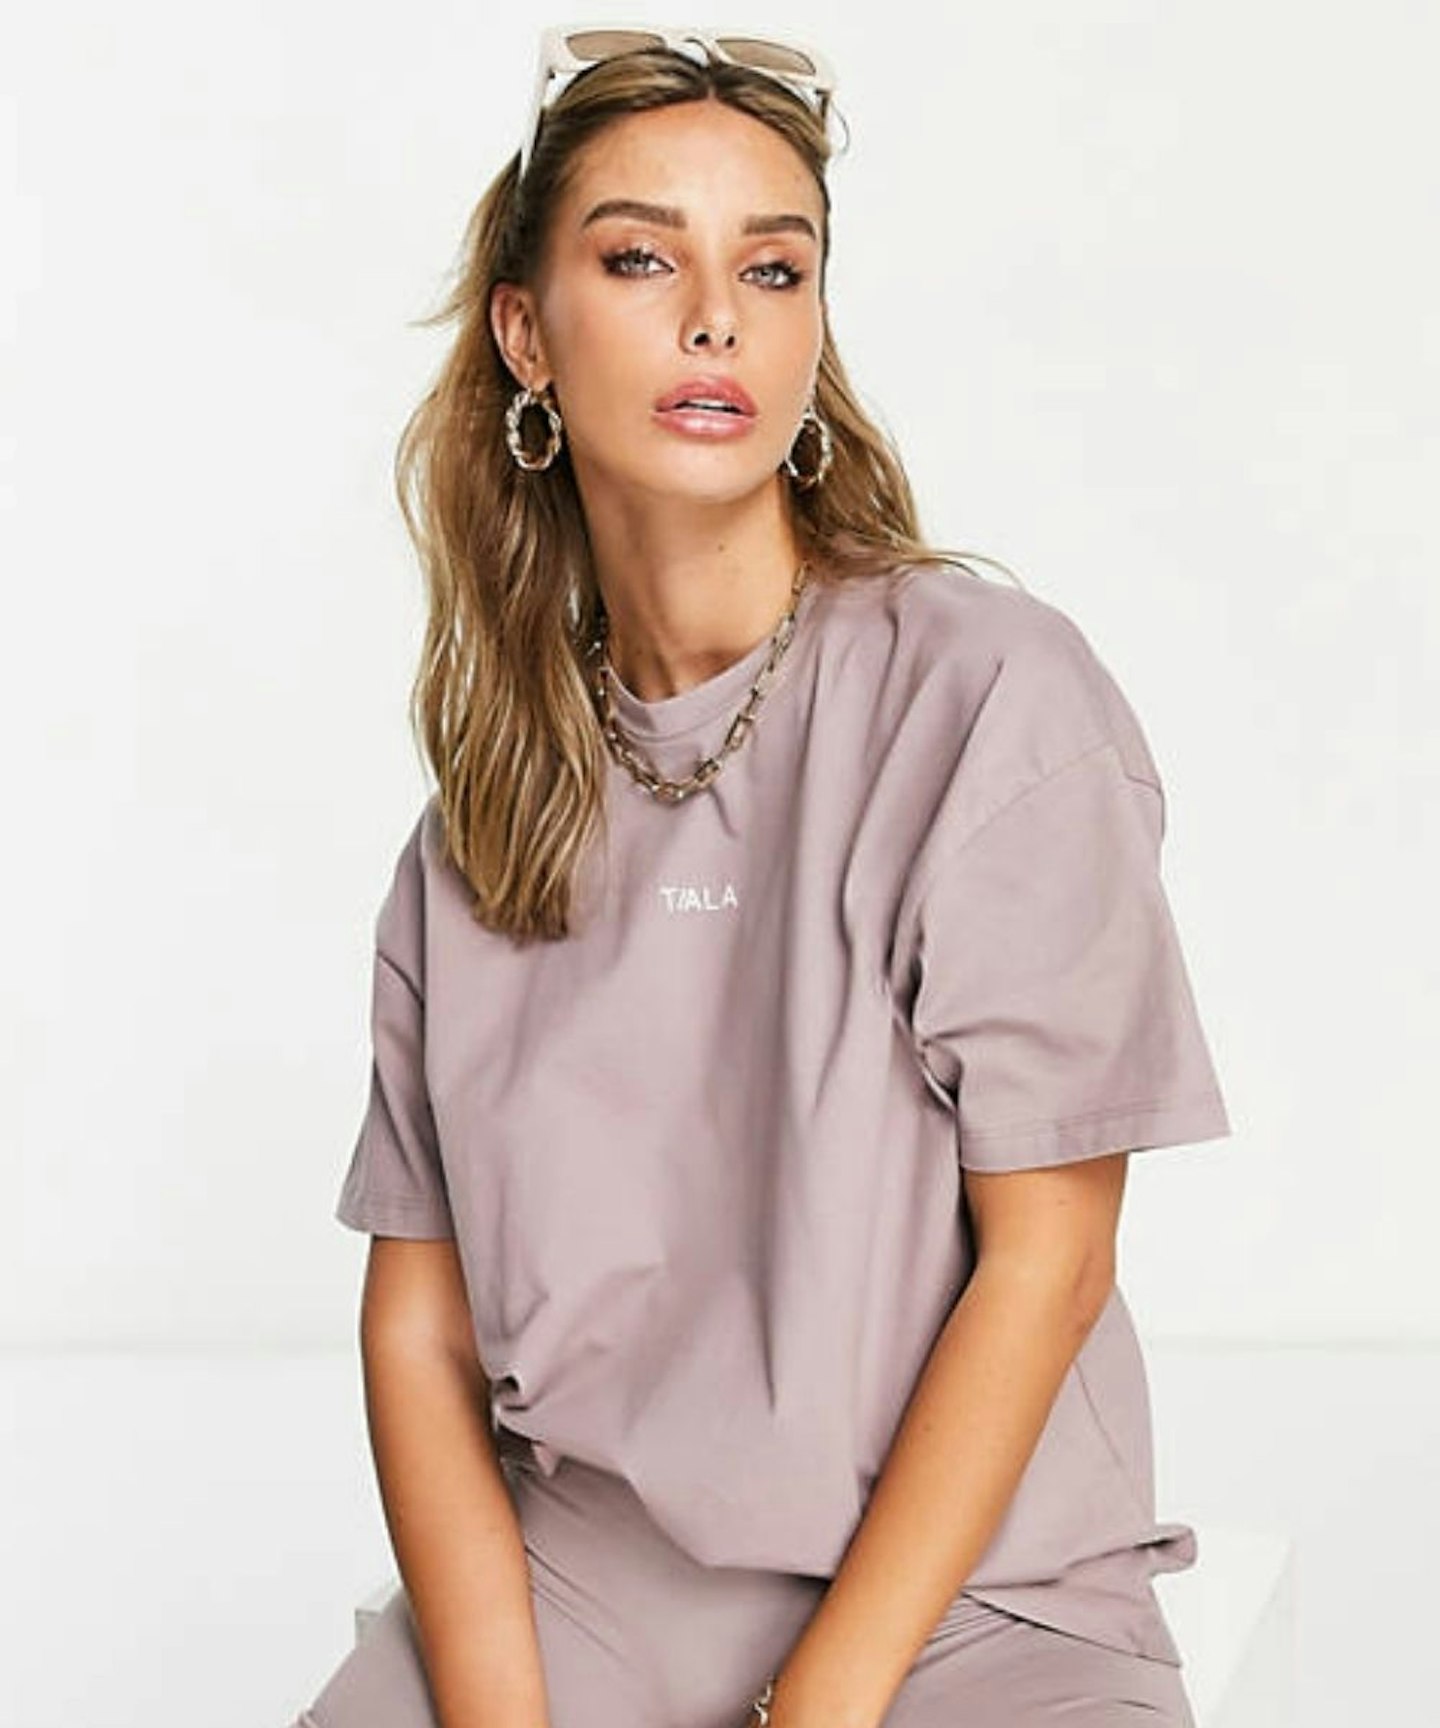 TALA oversized t-shirt in stone exclusive to ASOS